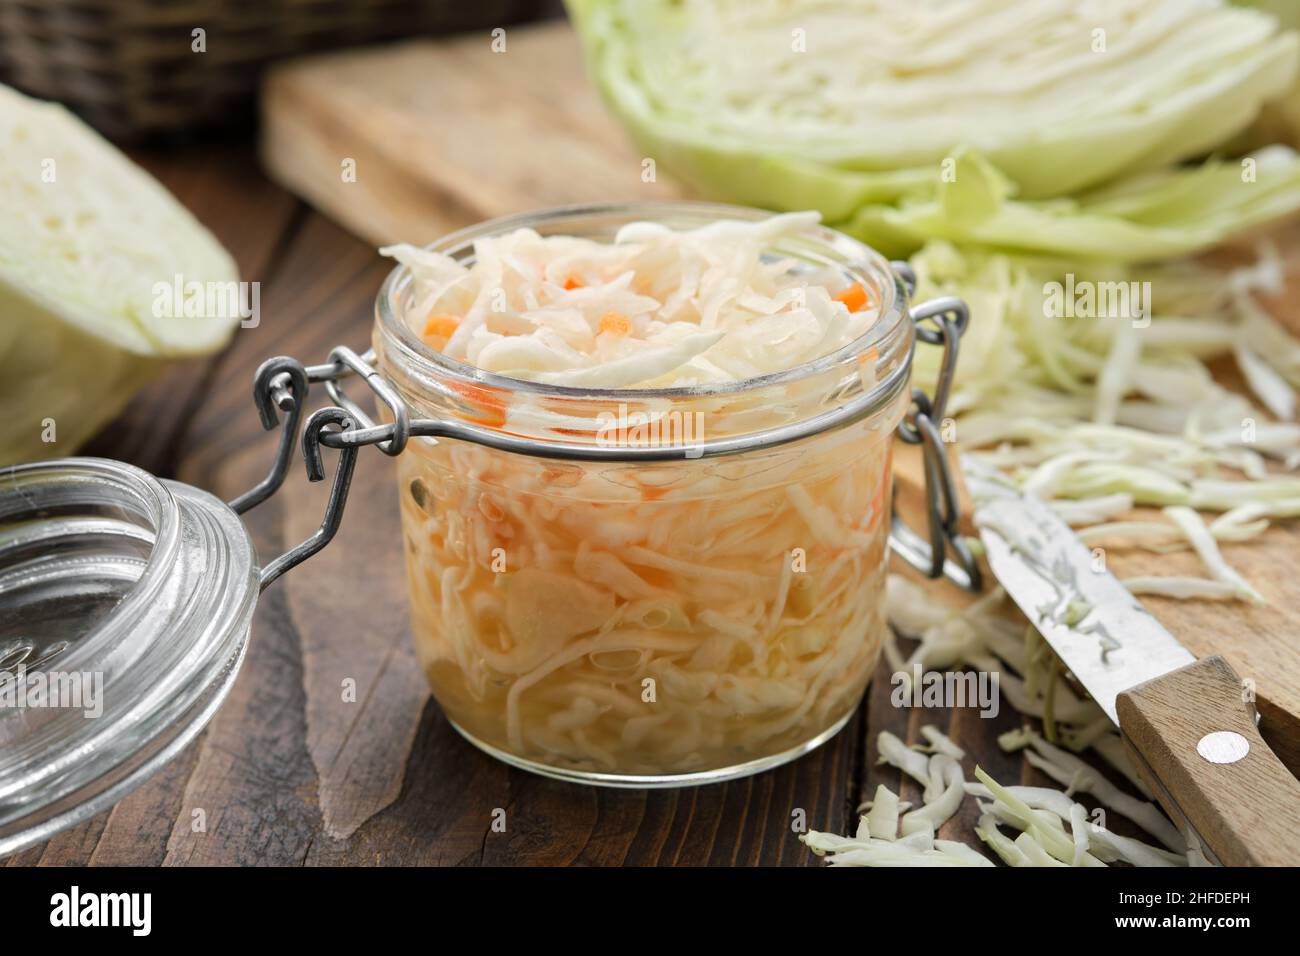 Jar of sour cabbage, pickled sauerkraut. Fermented cabbage, coleslaw salad. Chopped cabbage on a cutting board for making sauerkraut on background. He Stock Photo